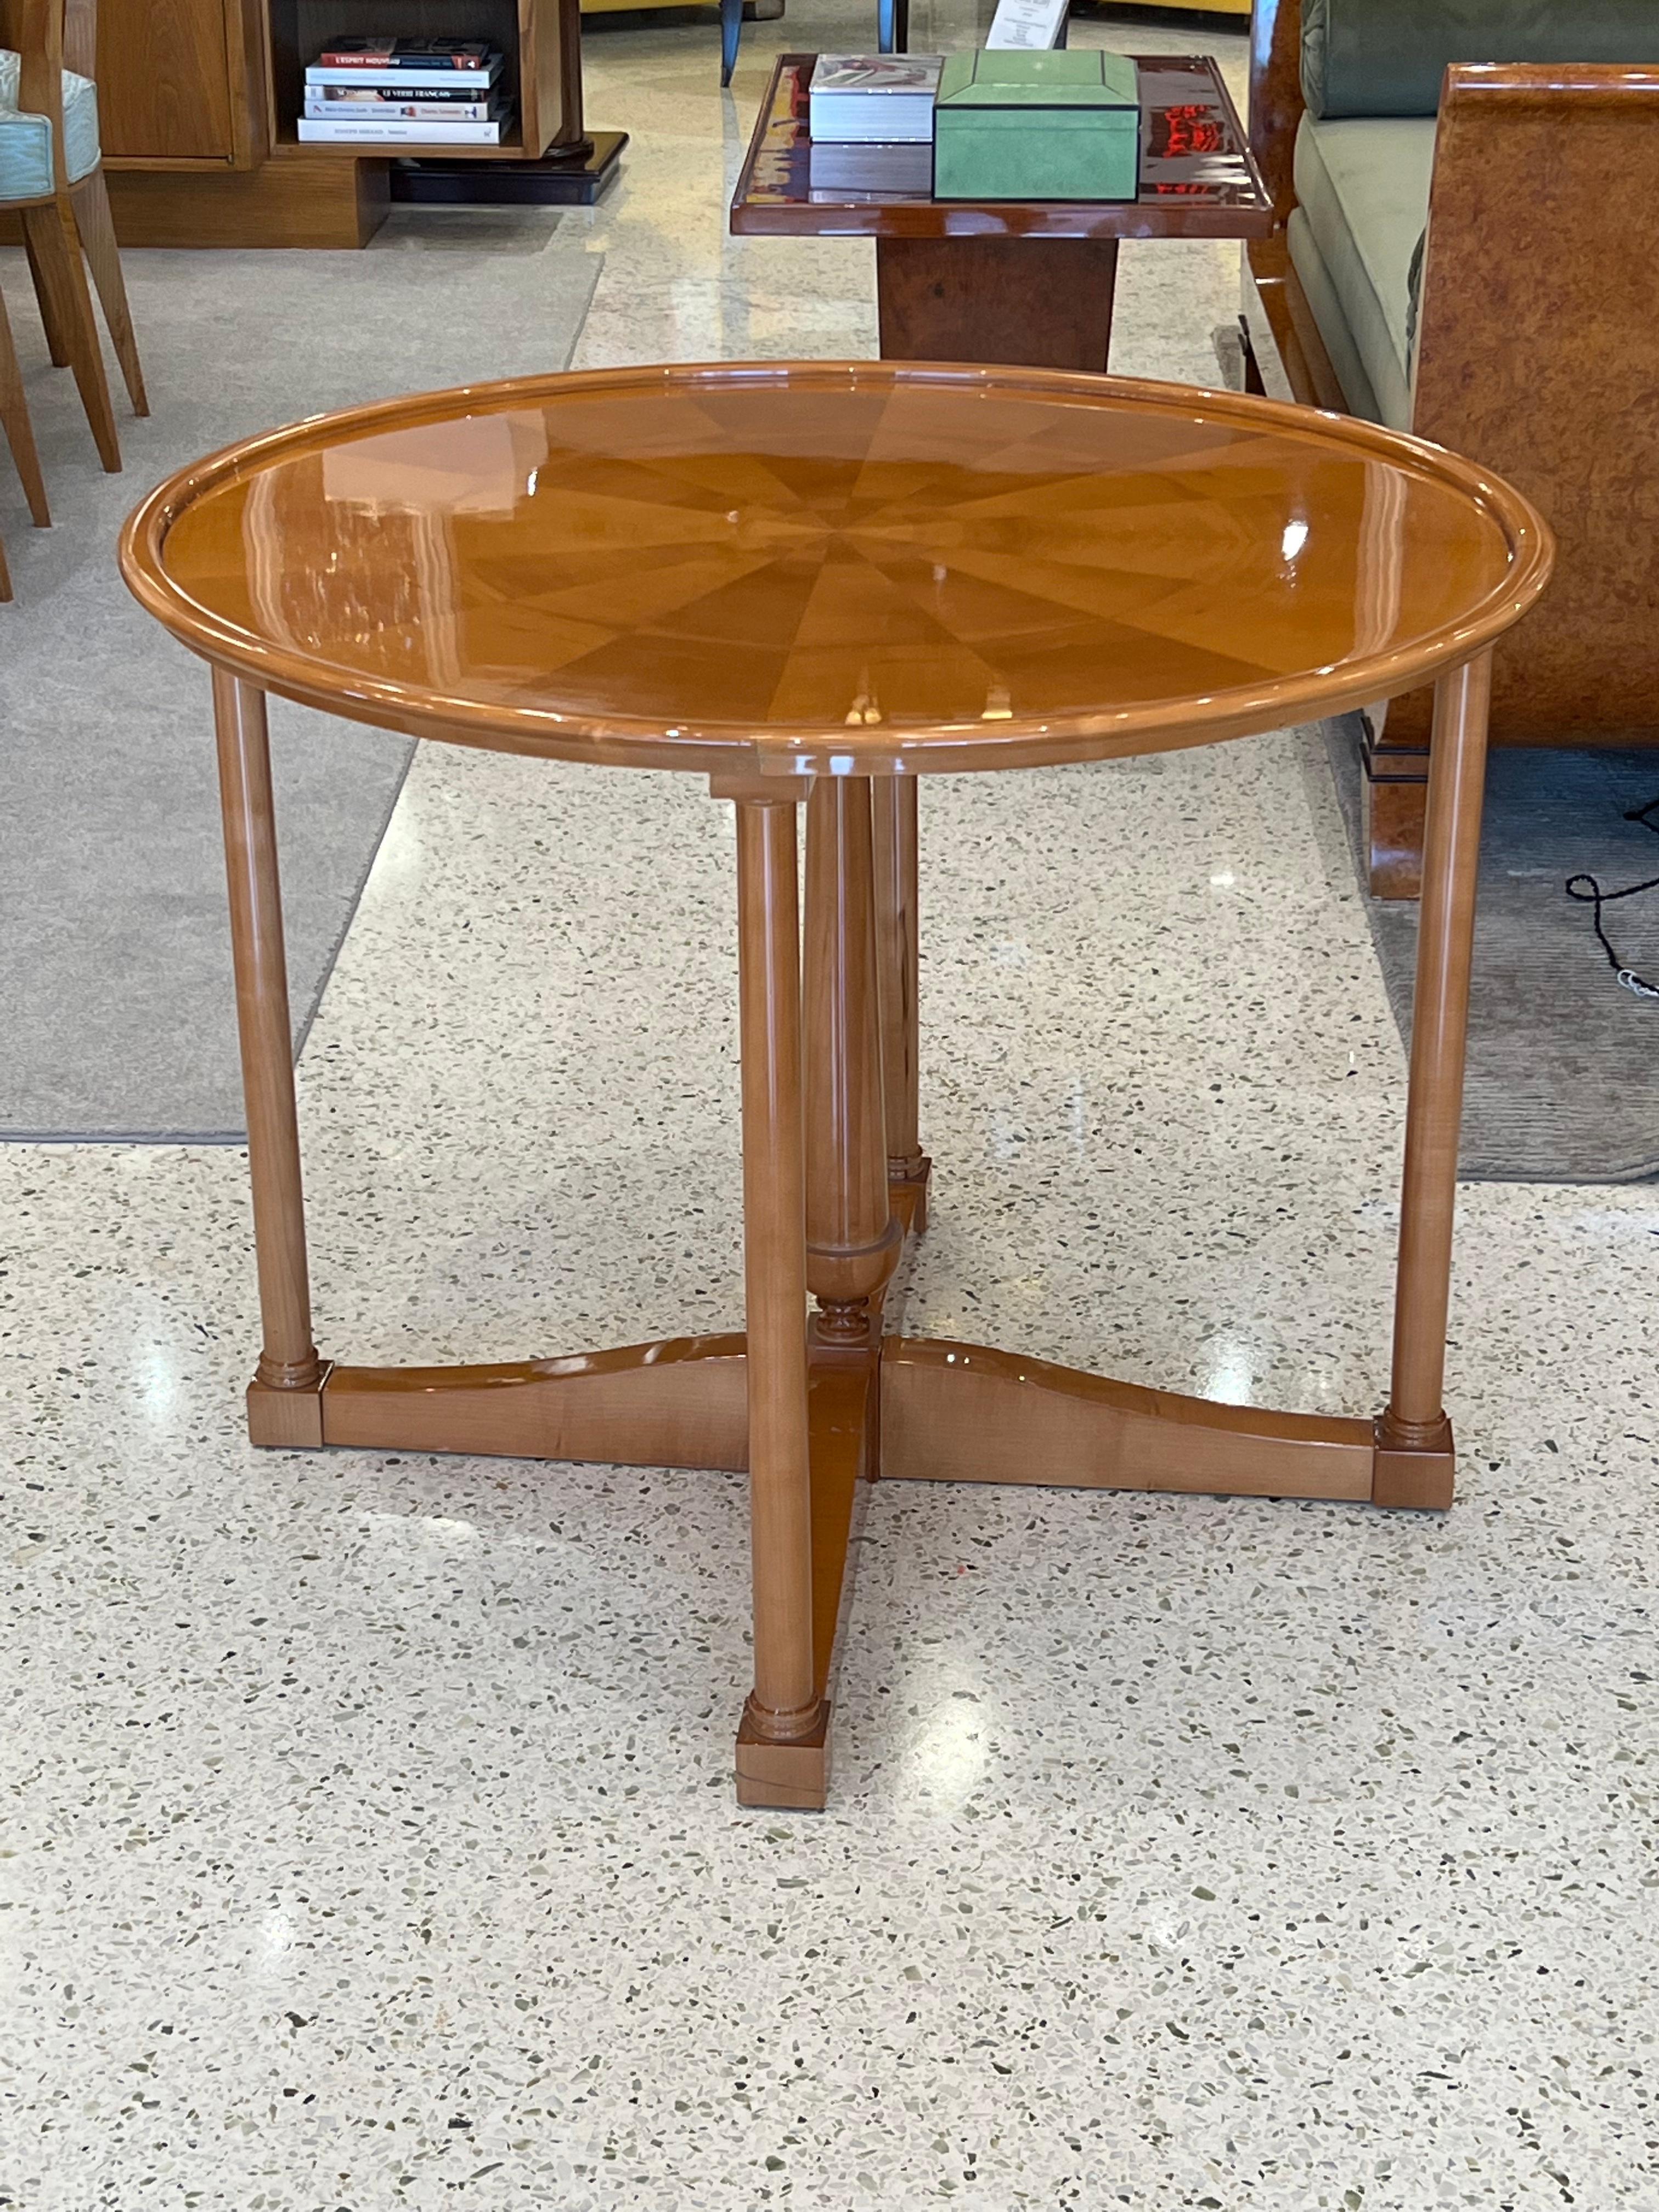 Sycamore wood round table/coffee table by French designer André Arbus.
